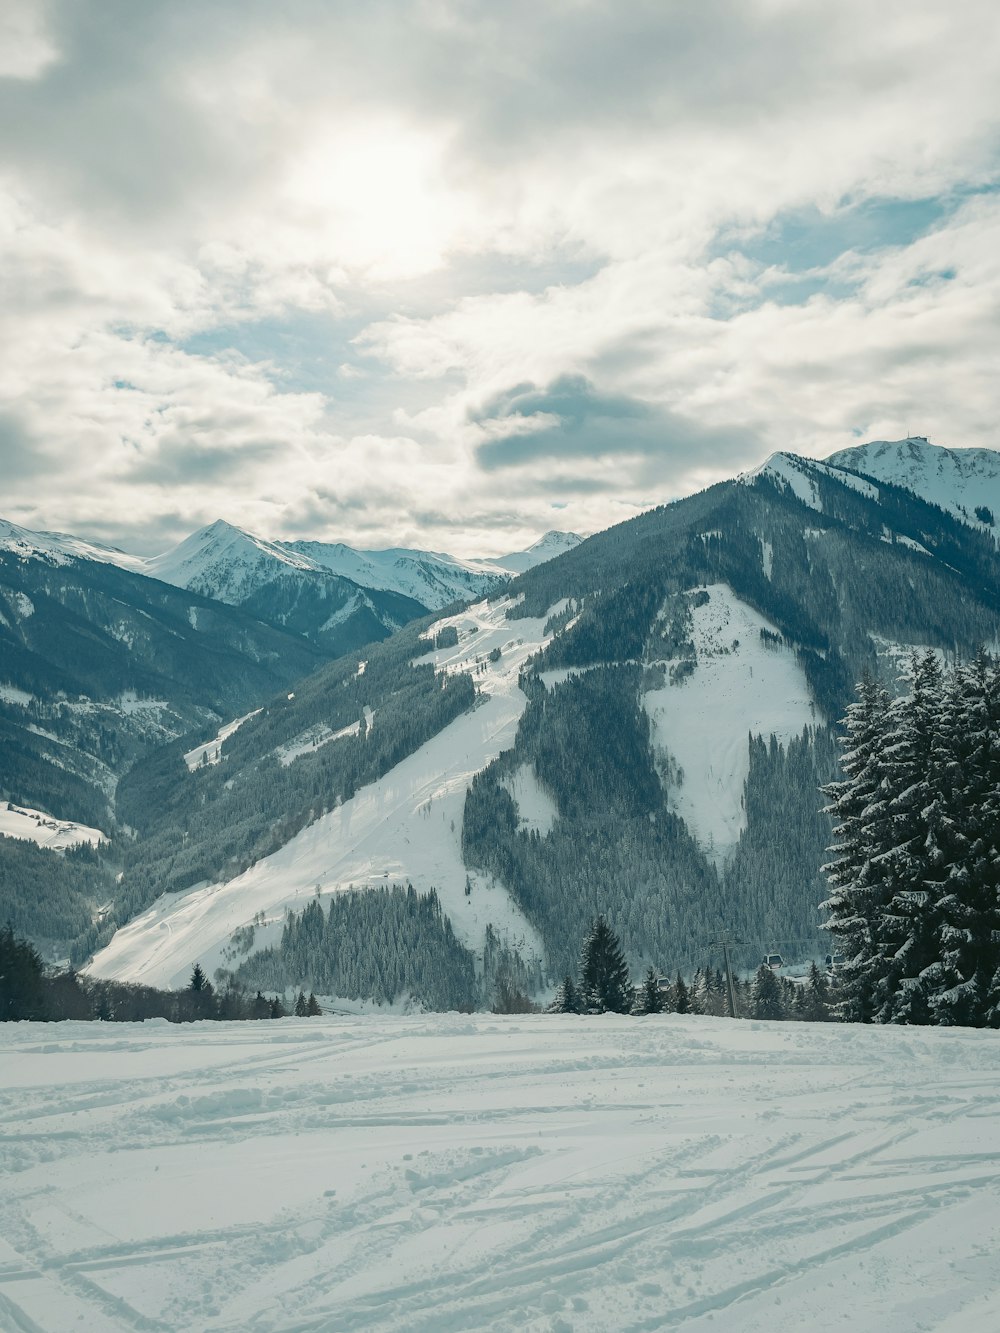 a snow covered ski slope with trees and mountains in the background